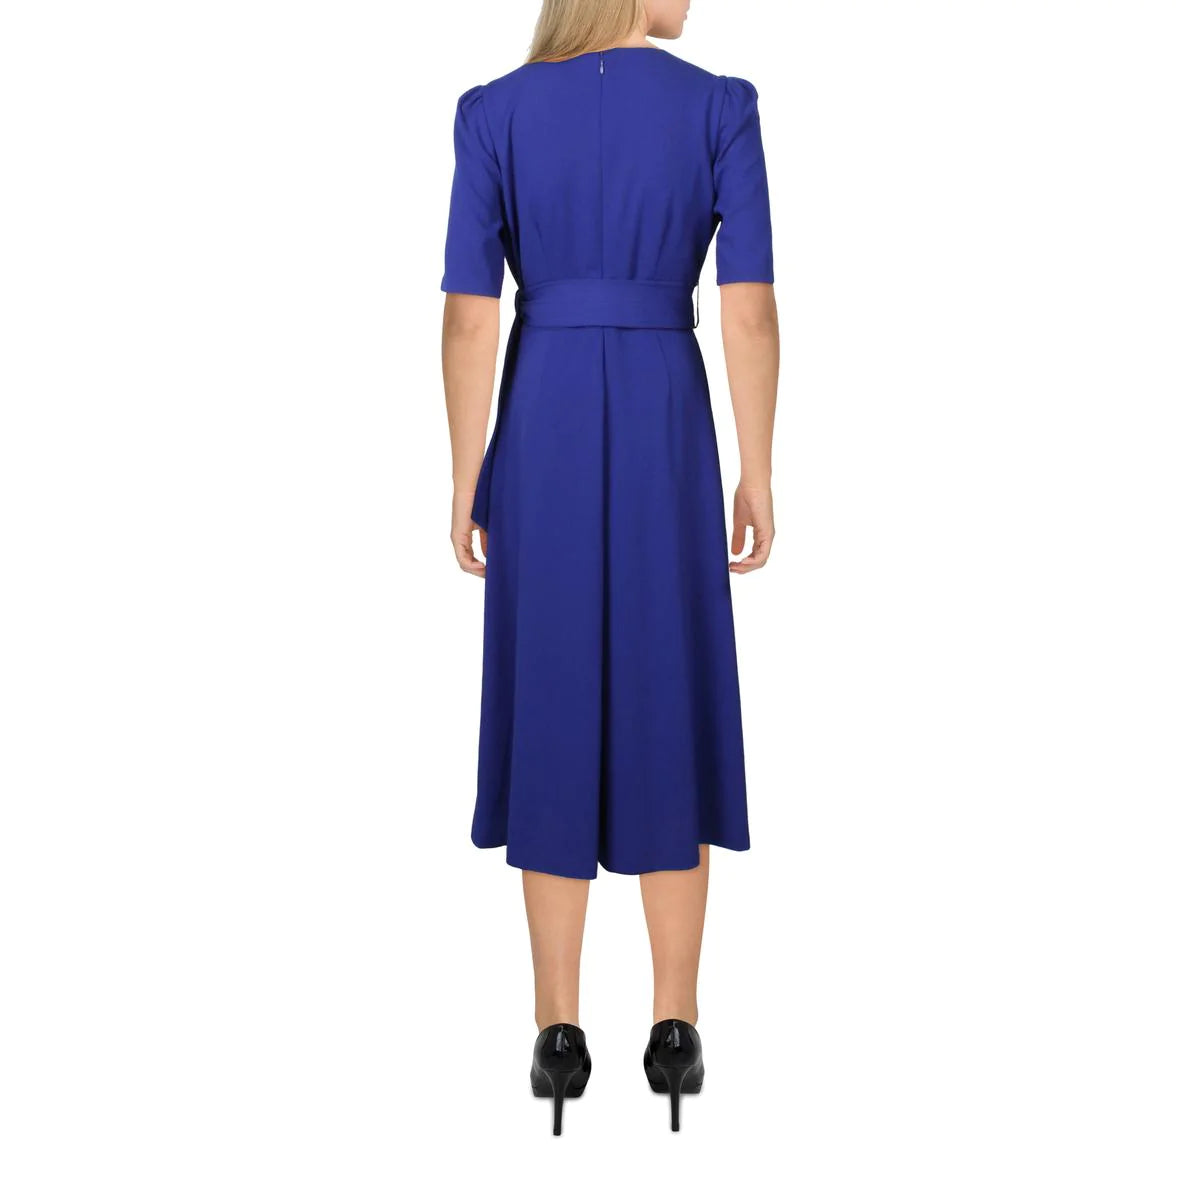 ZOPDI Women Fit and Flare Blue Dress - Buy ZOPDI Women Fit and